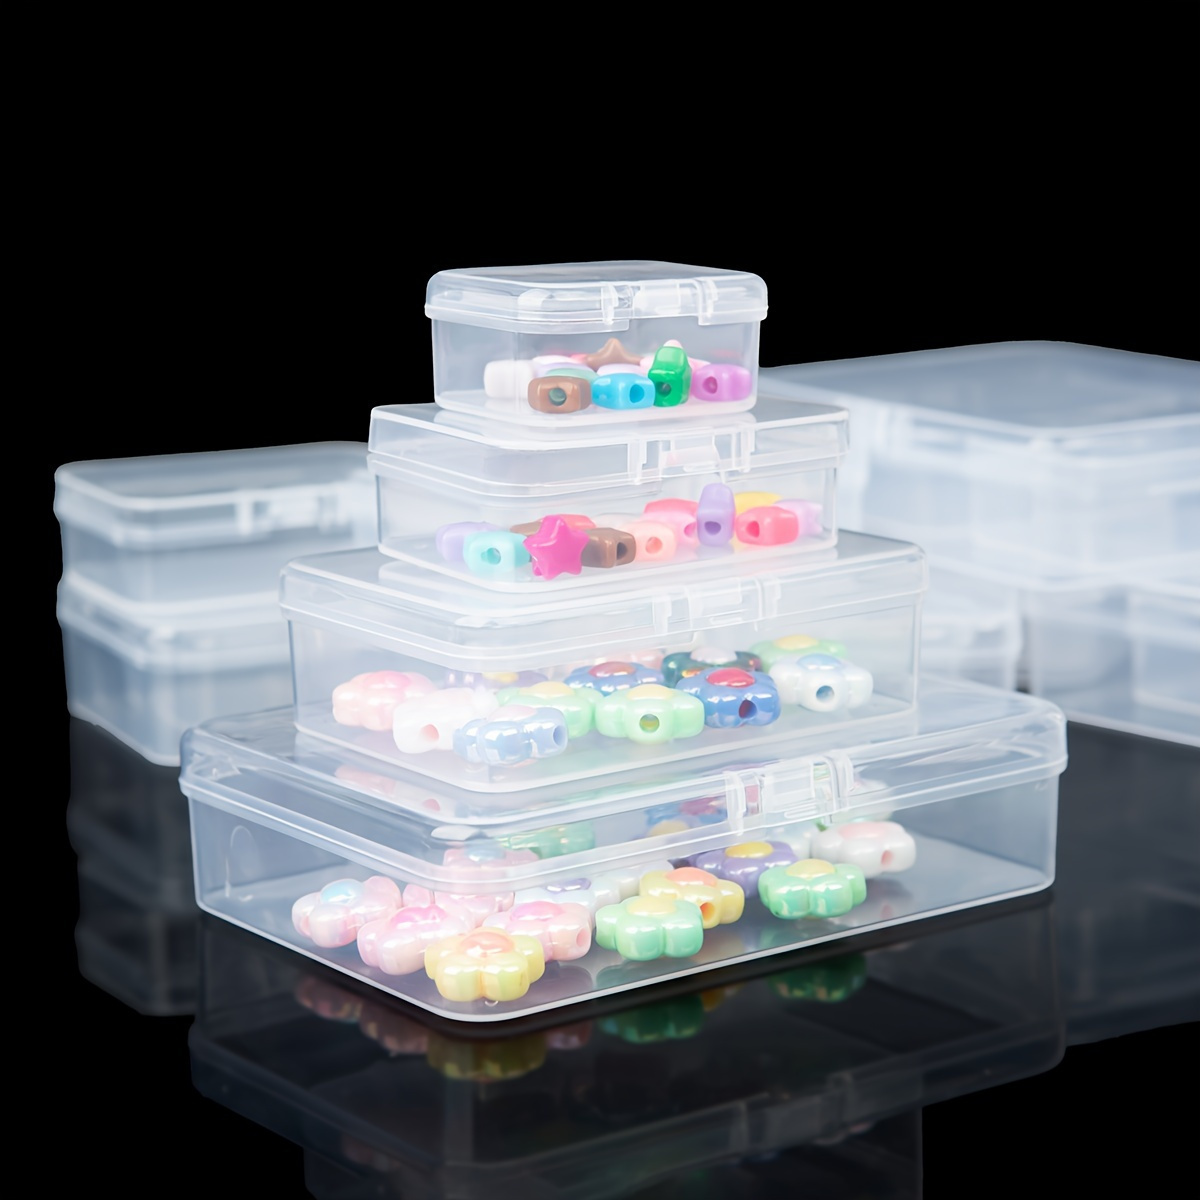 

24pcs Clear Plastic Storage Boxes With Lids, 4 Sizes, Rectangular Organization Containers For Jewelry, Beads, Buttons, Seed Beads, Small Items, Diy Arts & Crafts Sorting And Accessories Organizer